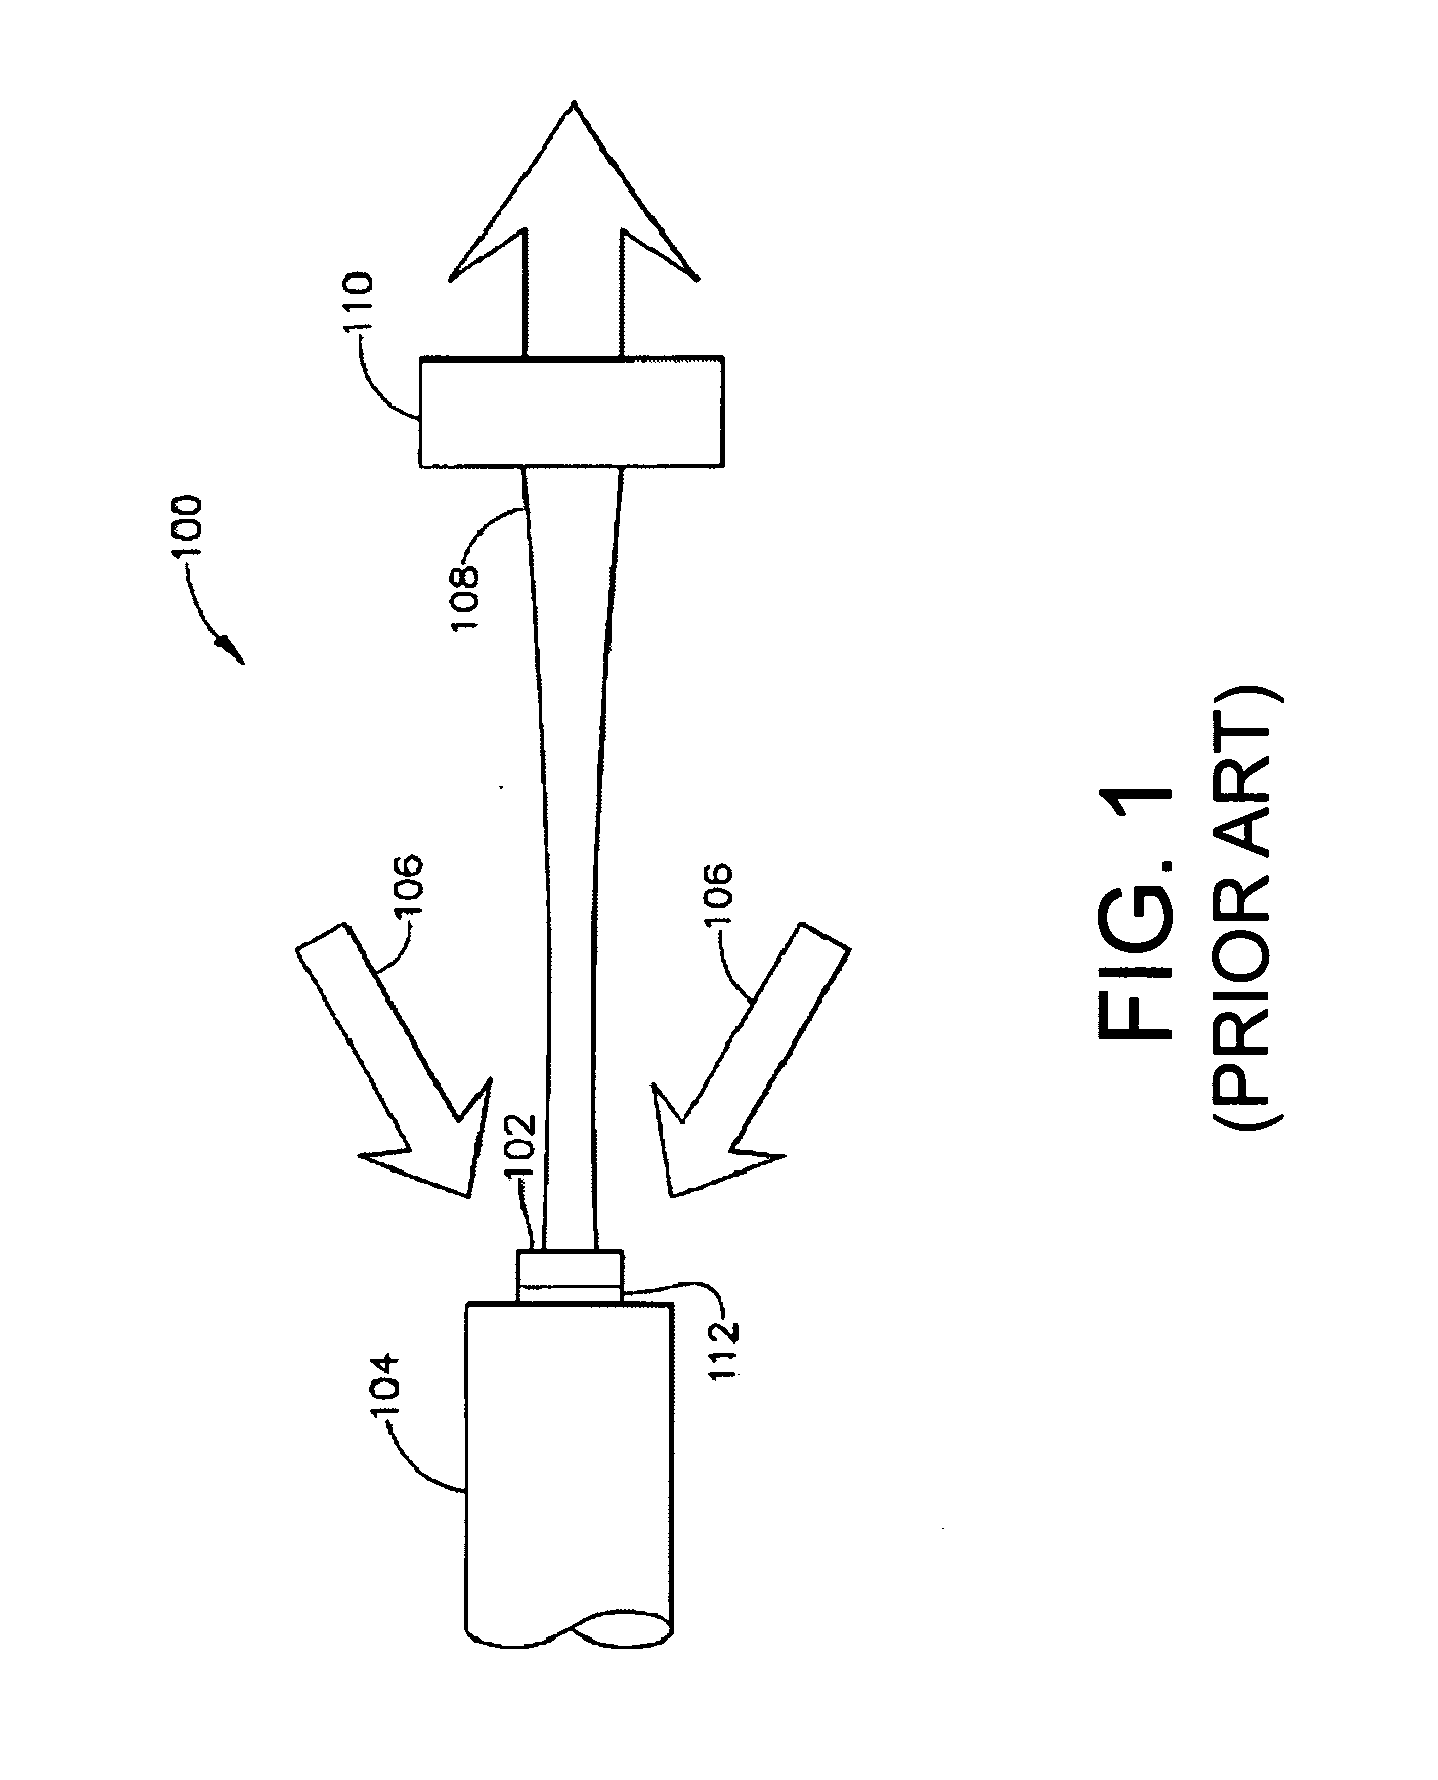 Solid-state laser with multi-pass beam delivery optics